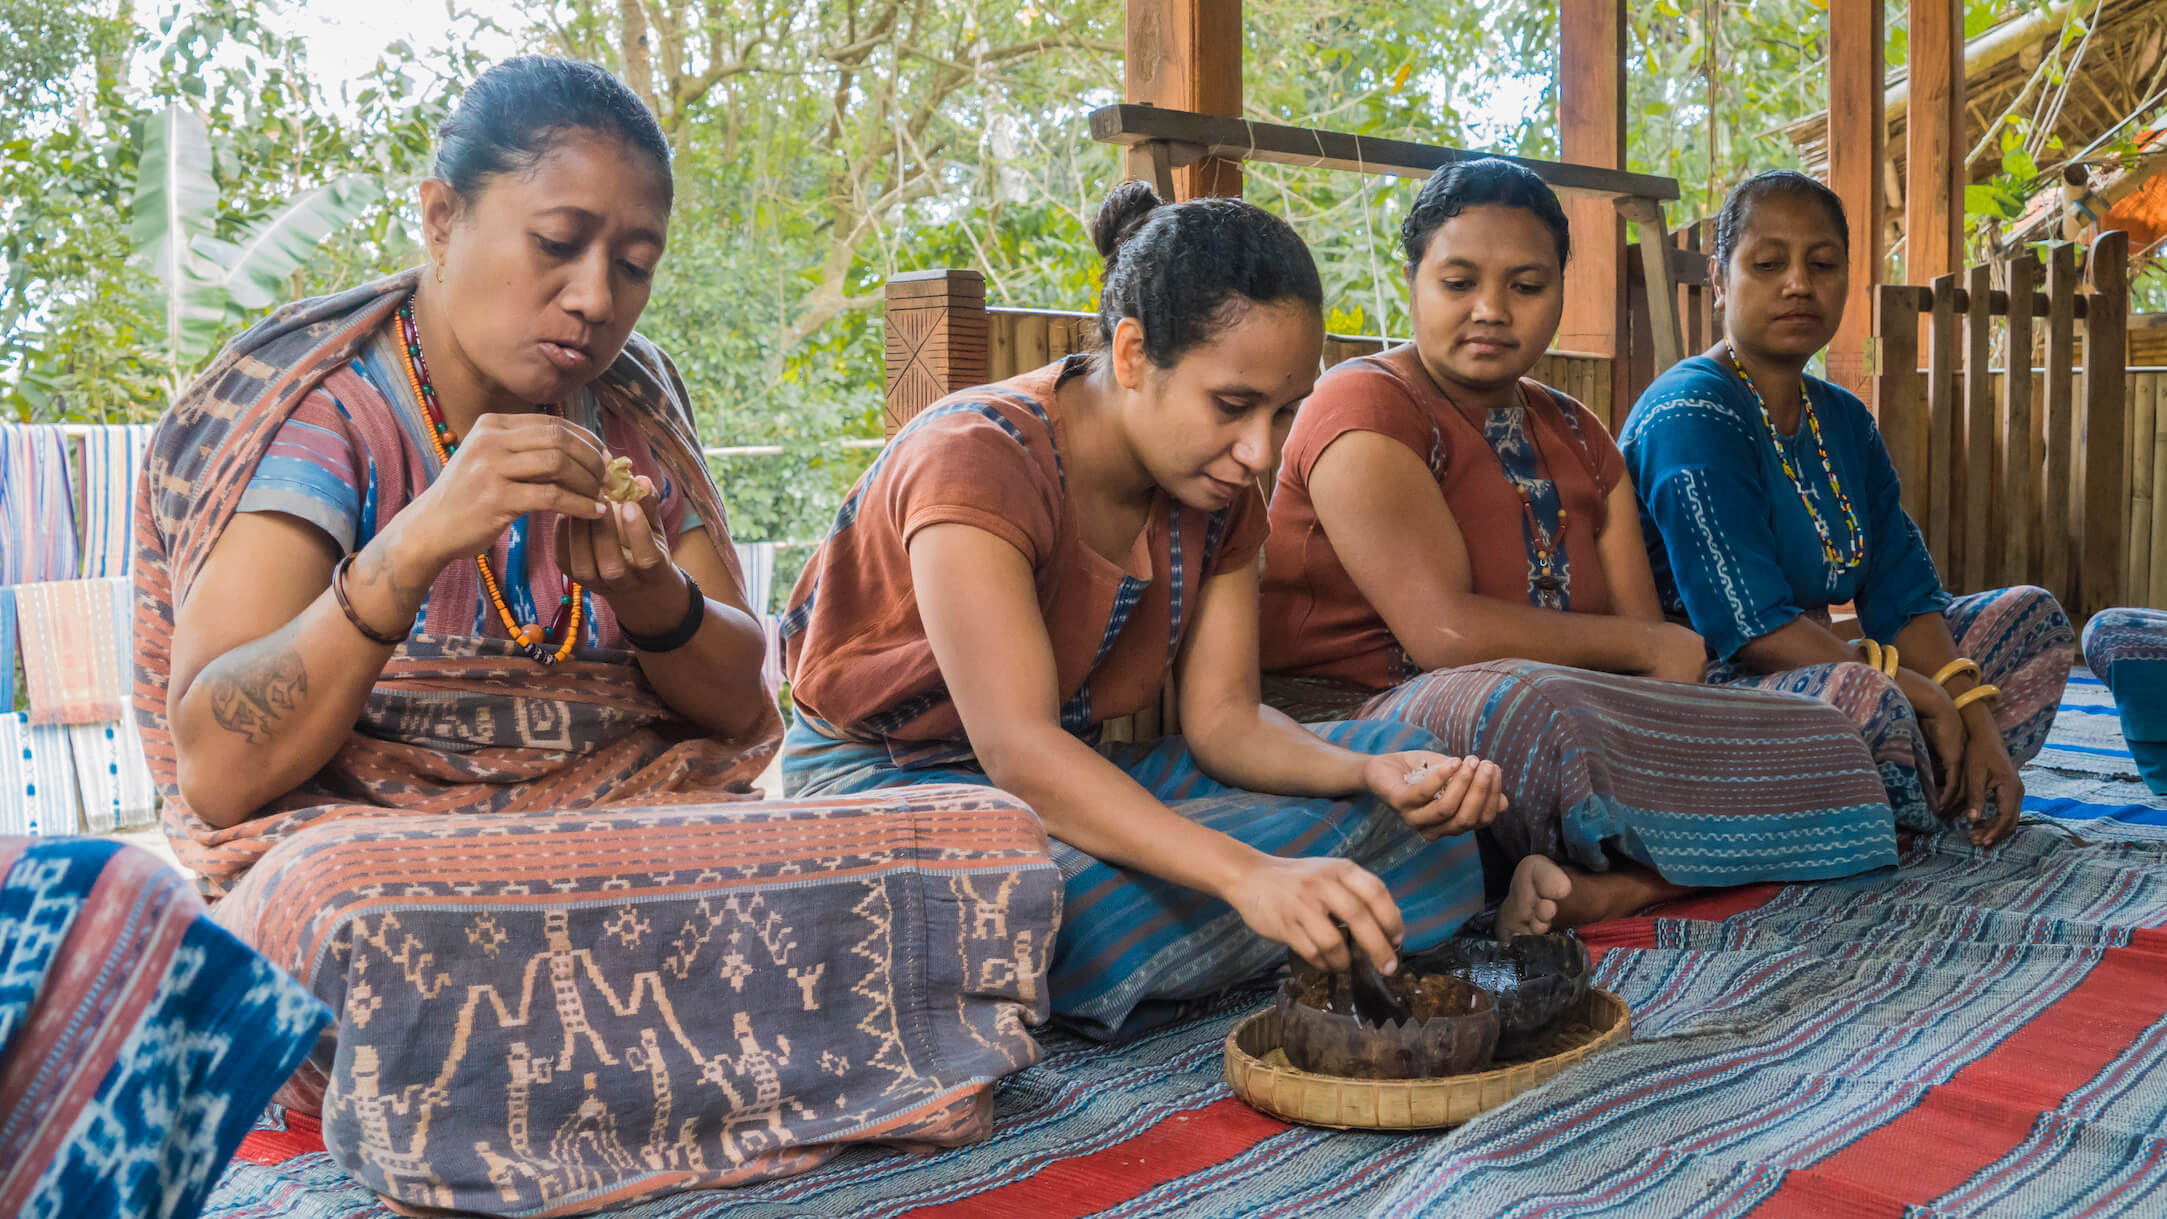 Rosvita (left), is seated alongside weavers Maria Nona Ice, Maria Suwanti, and Nona Eta, at the welcome ceremony. Guests eat rice and chicken heart, and drink chicken soup from a cup. Photo by Andra Fembriarto